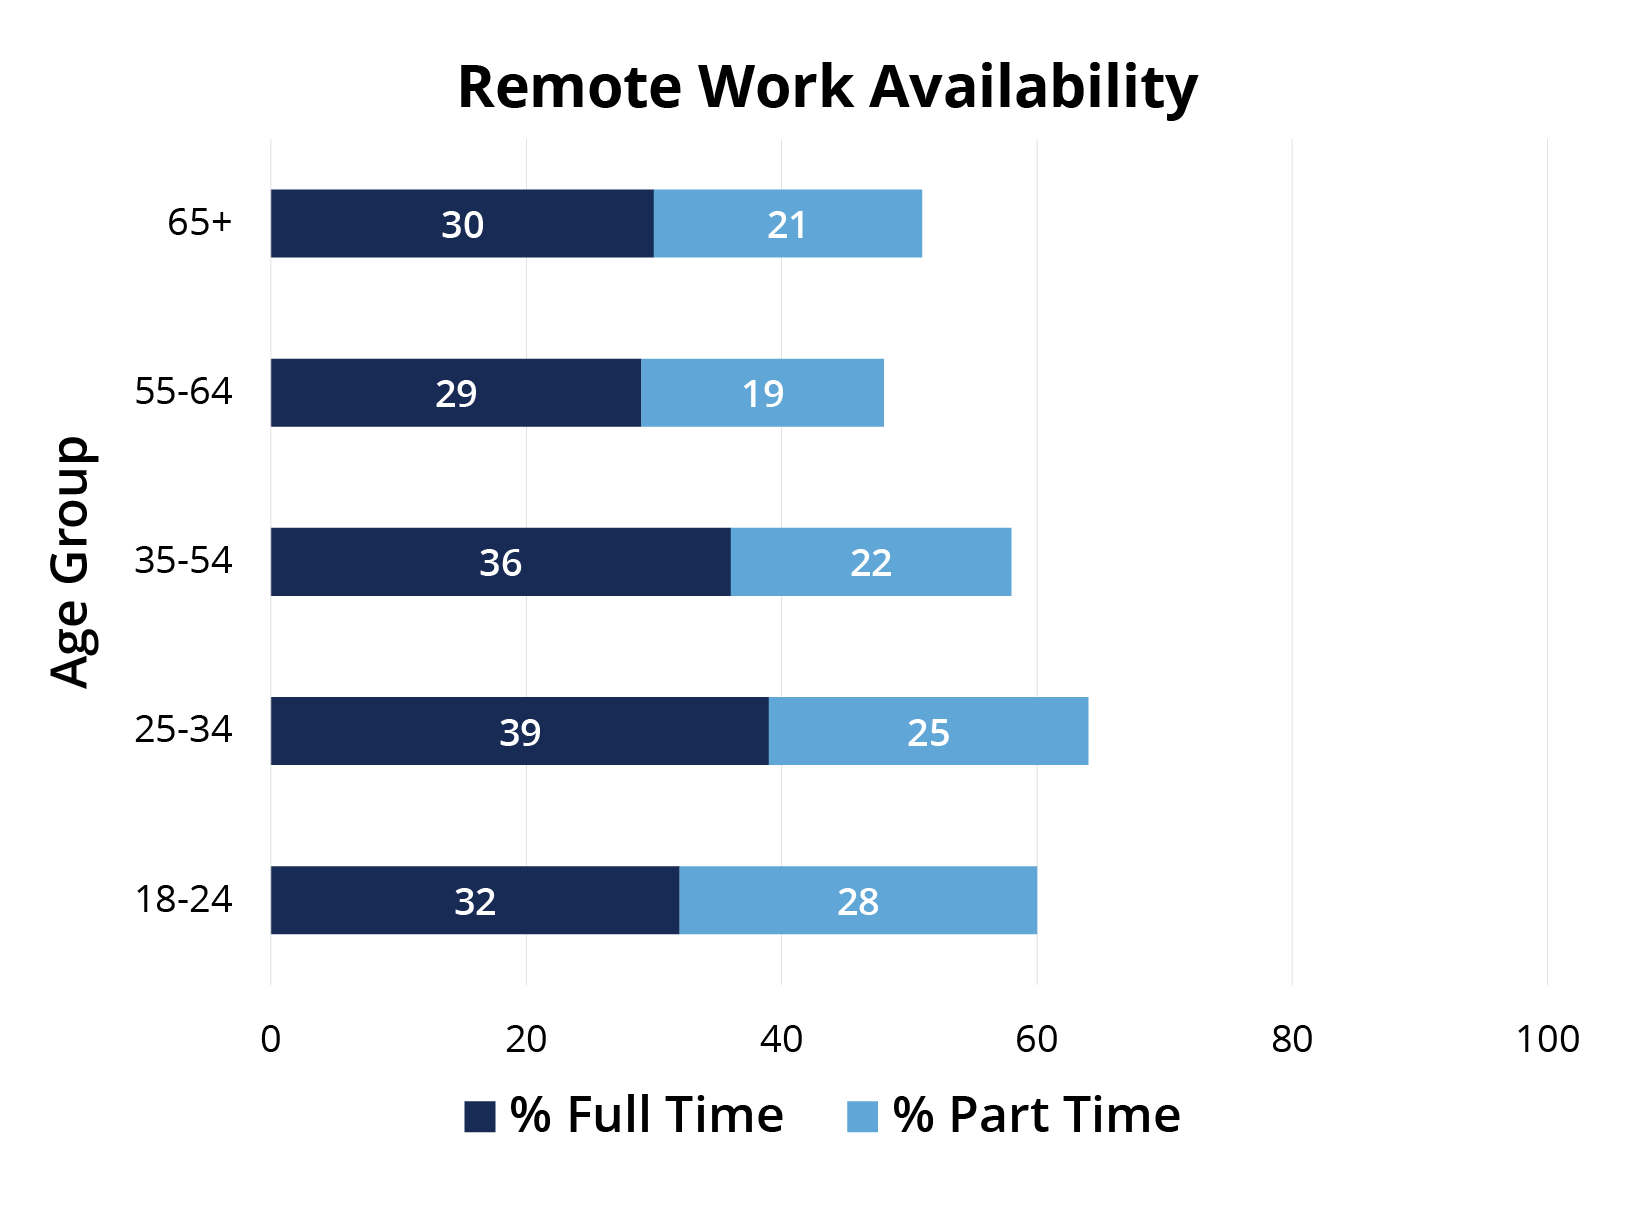 Remote Work availability, as of 2022